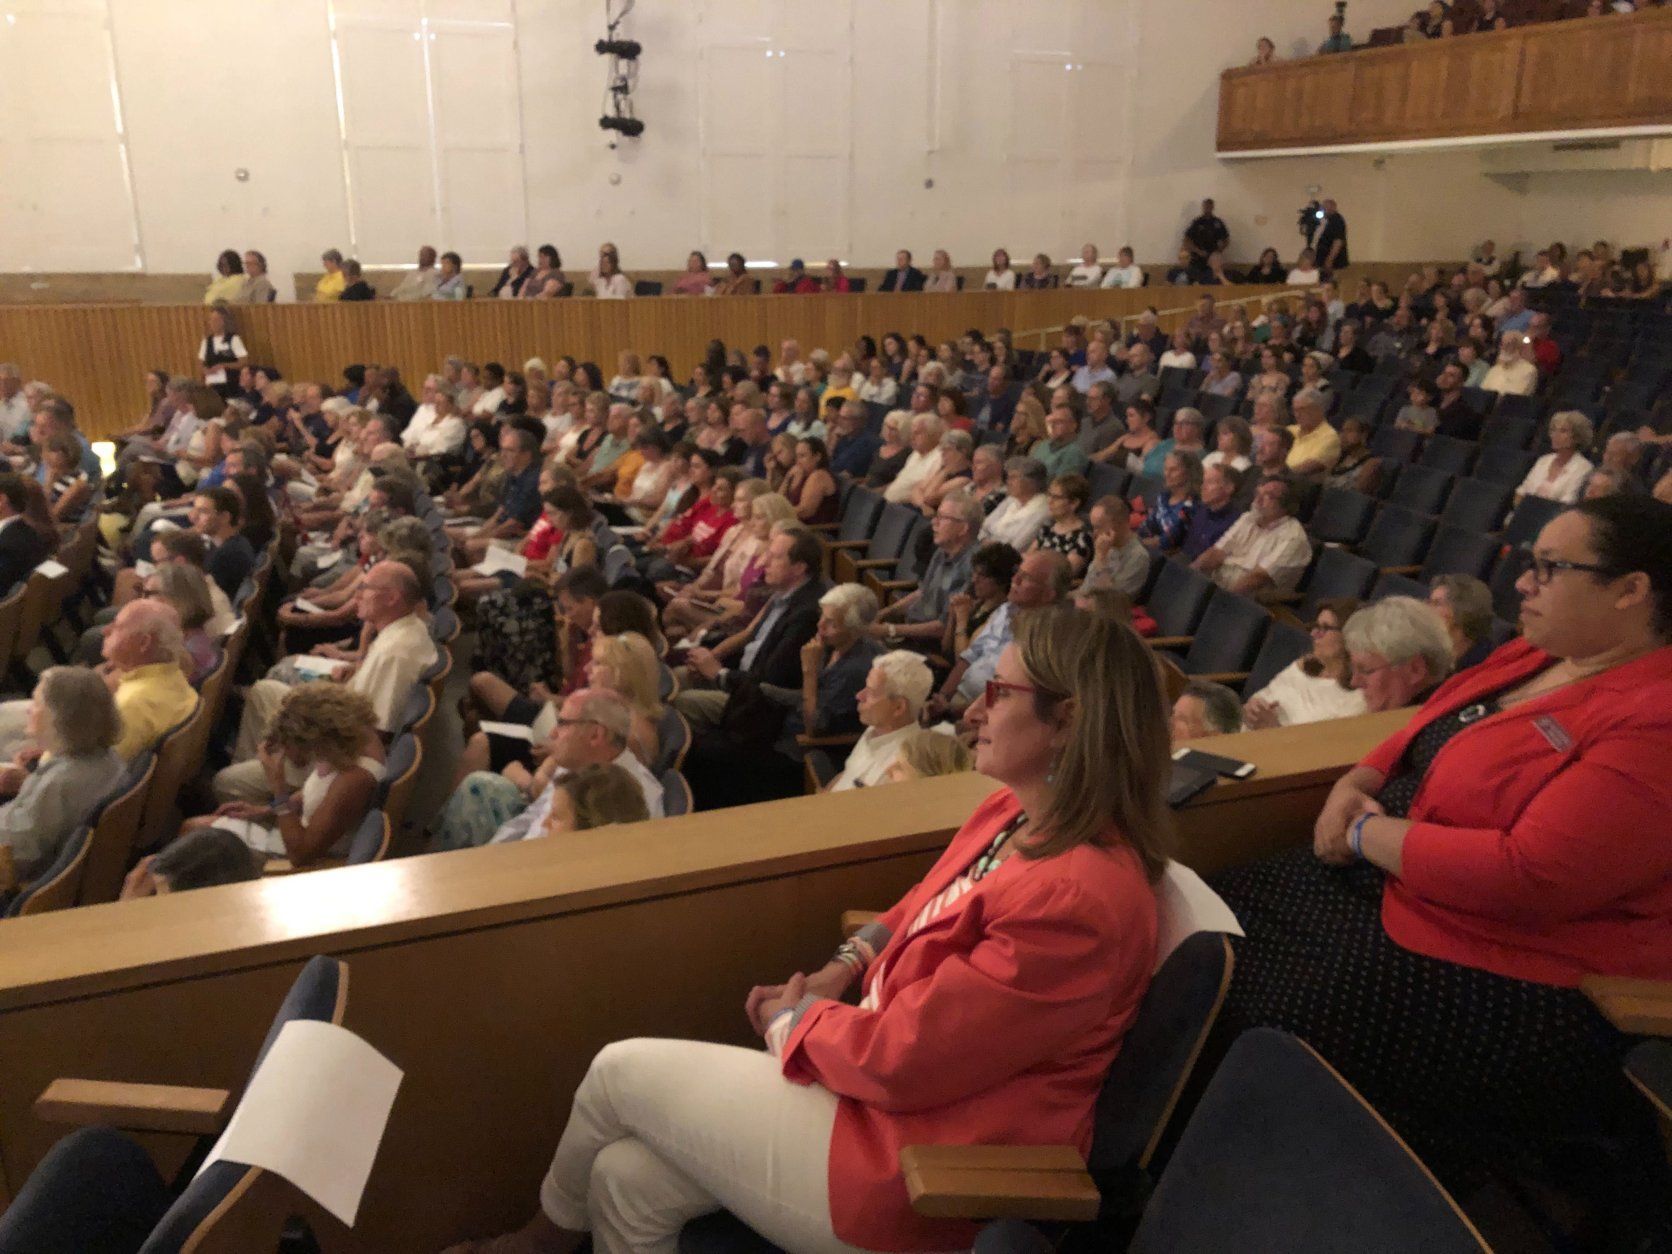 Family, friends and community members packed into the Maryland Hall in Annapolis Friday night to remember the five Capital Gazette employees who died after a gunman opened fire in their newsroom exactly one year ago. (WTOP/Mike Murillo)